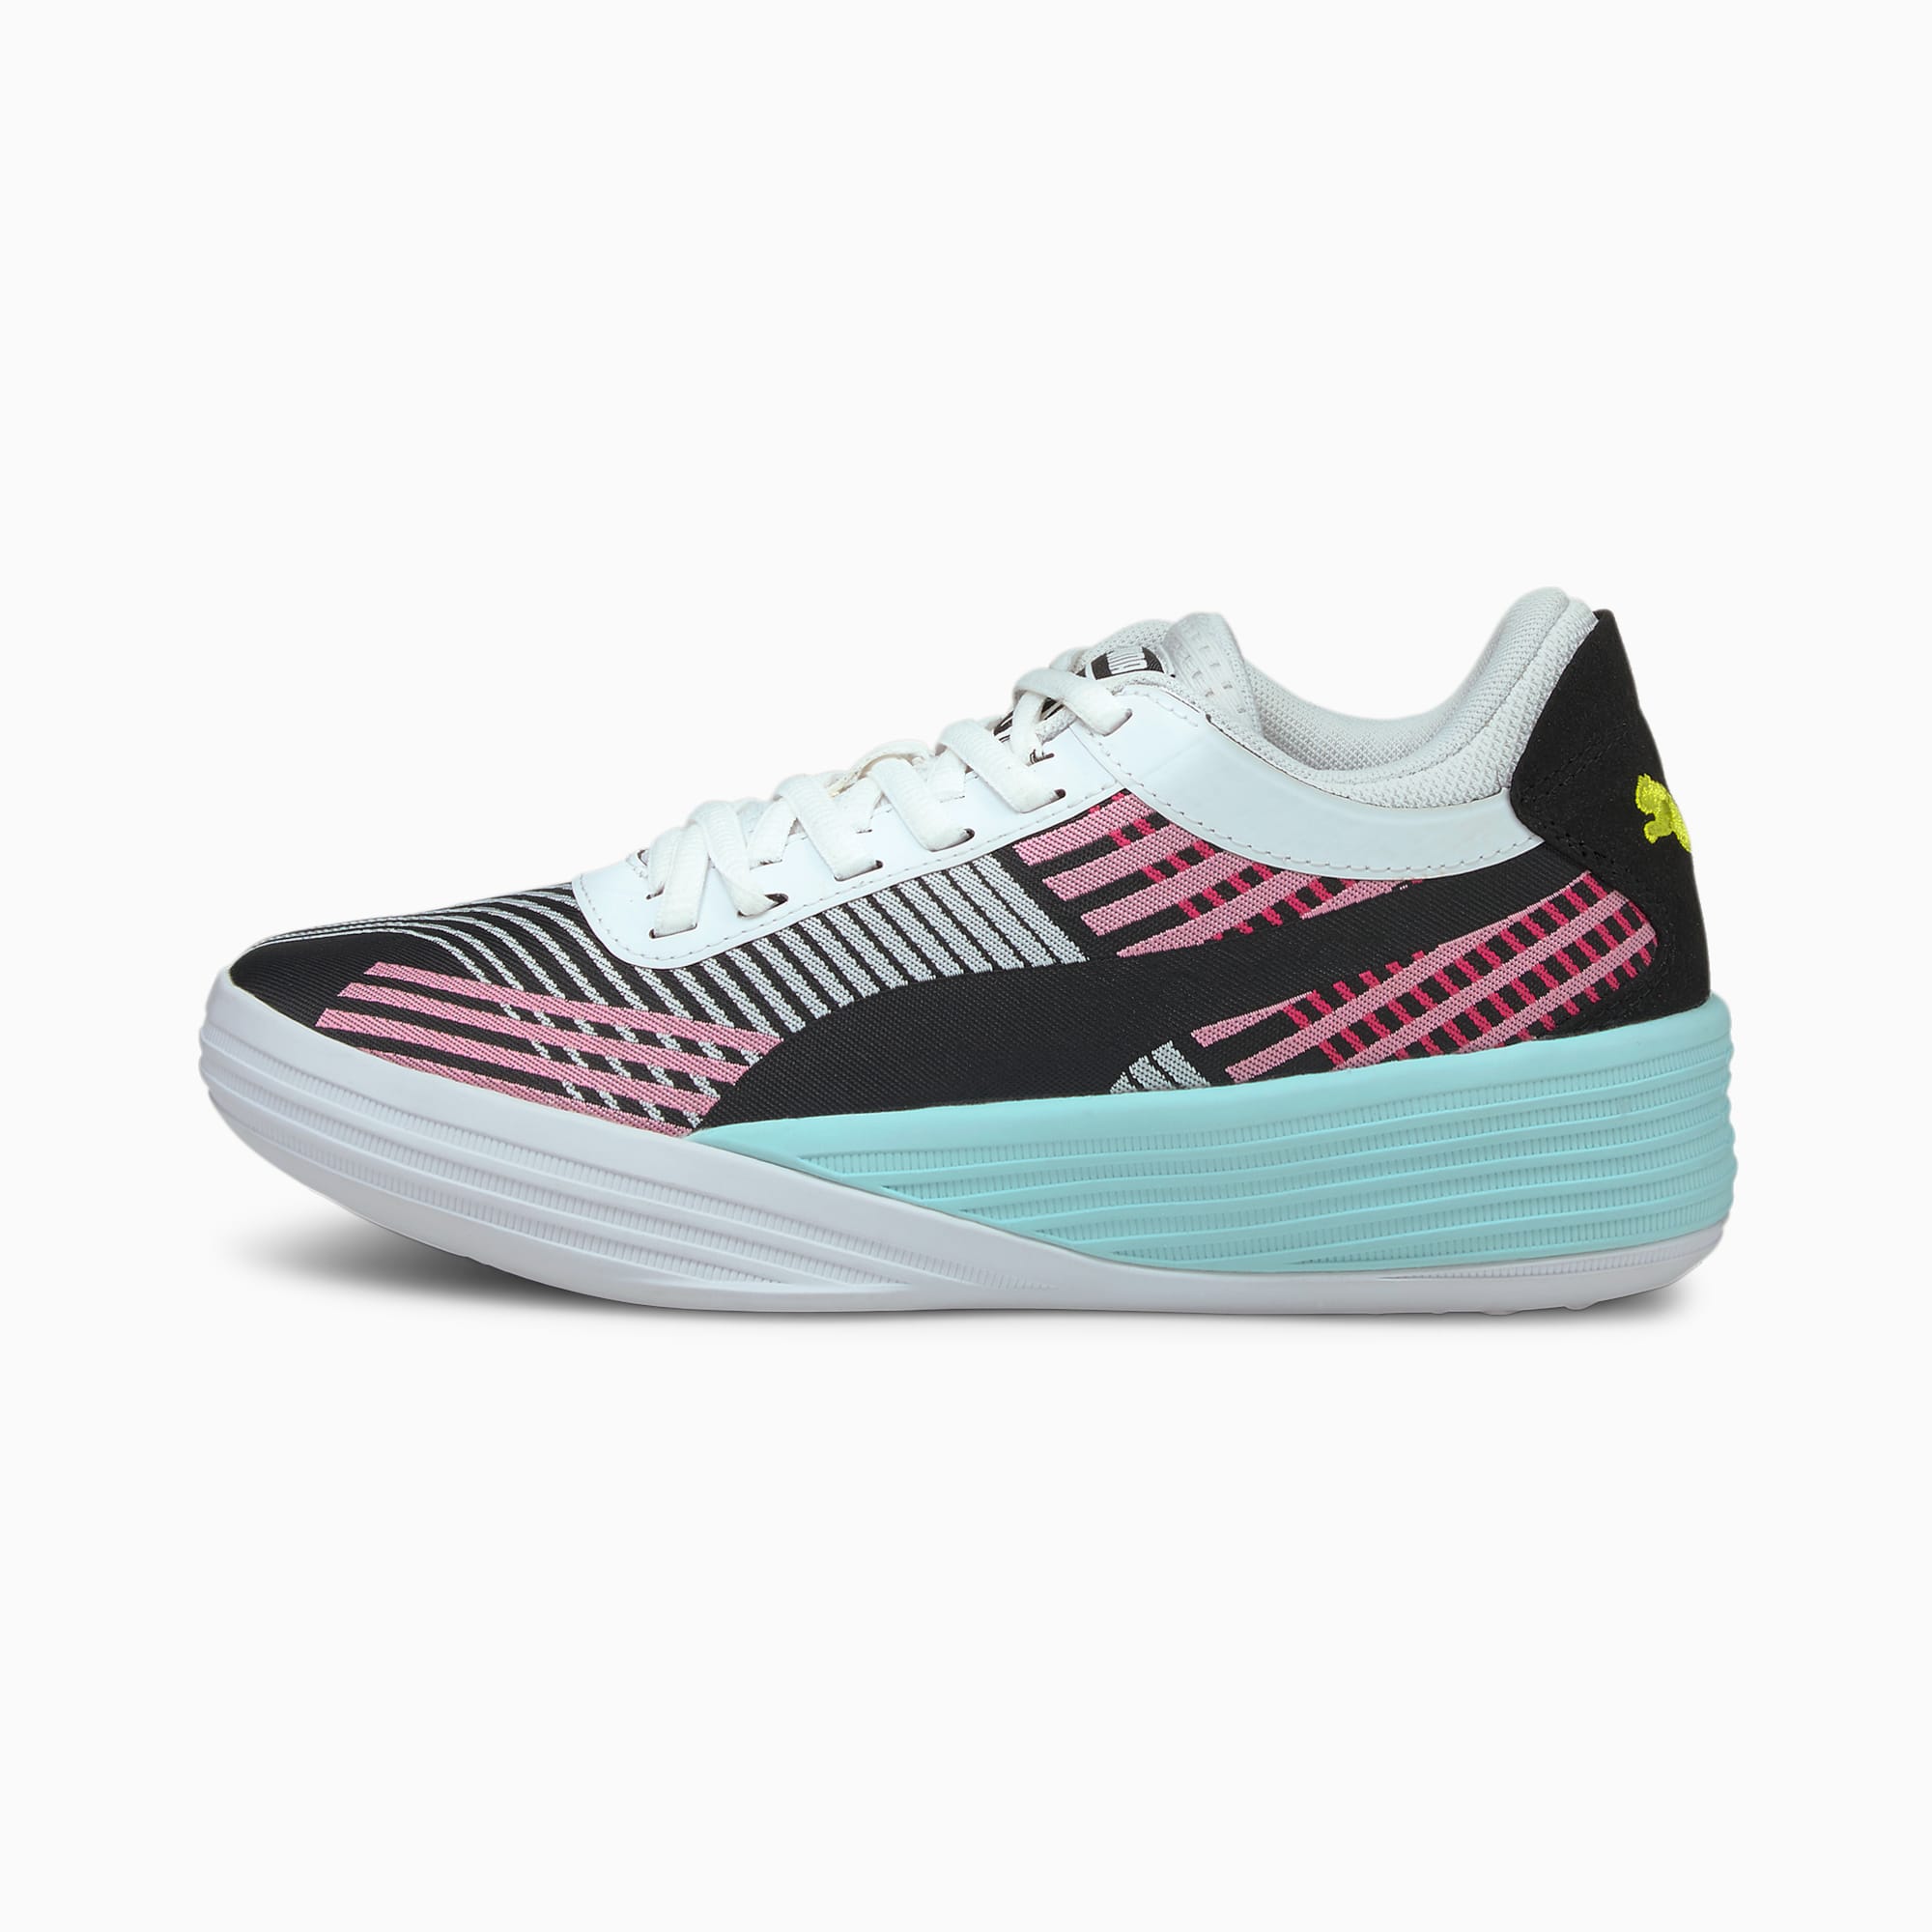 youth pink basketball shoes